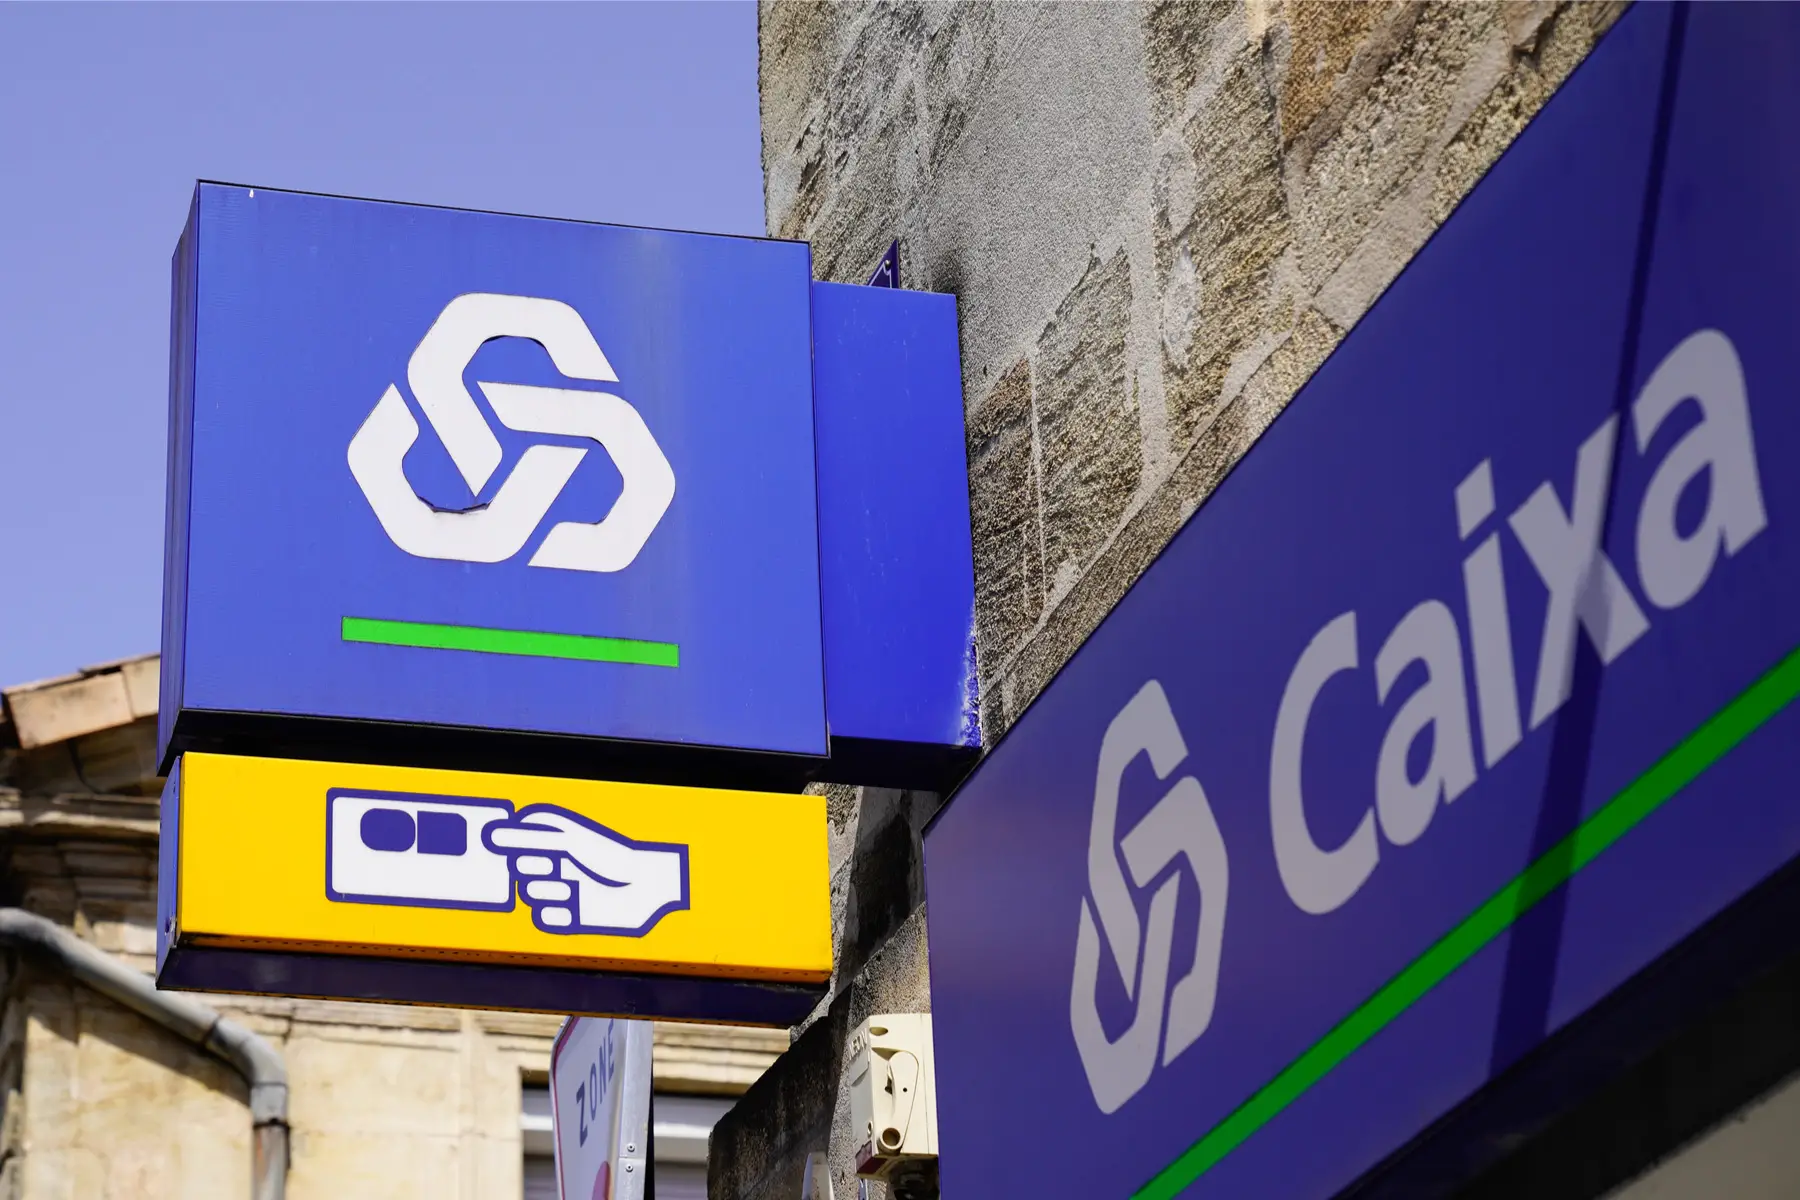 money transfers: signage for Caixa bank in Portugal